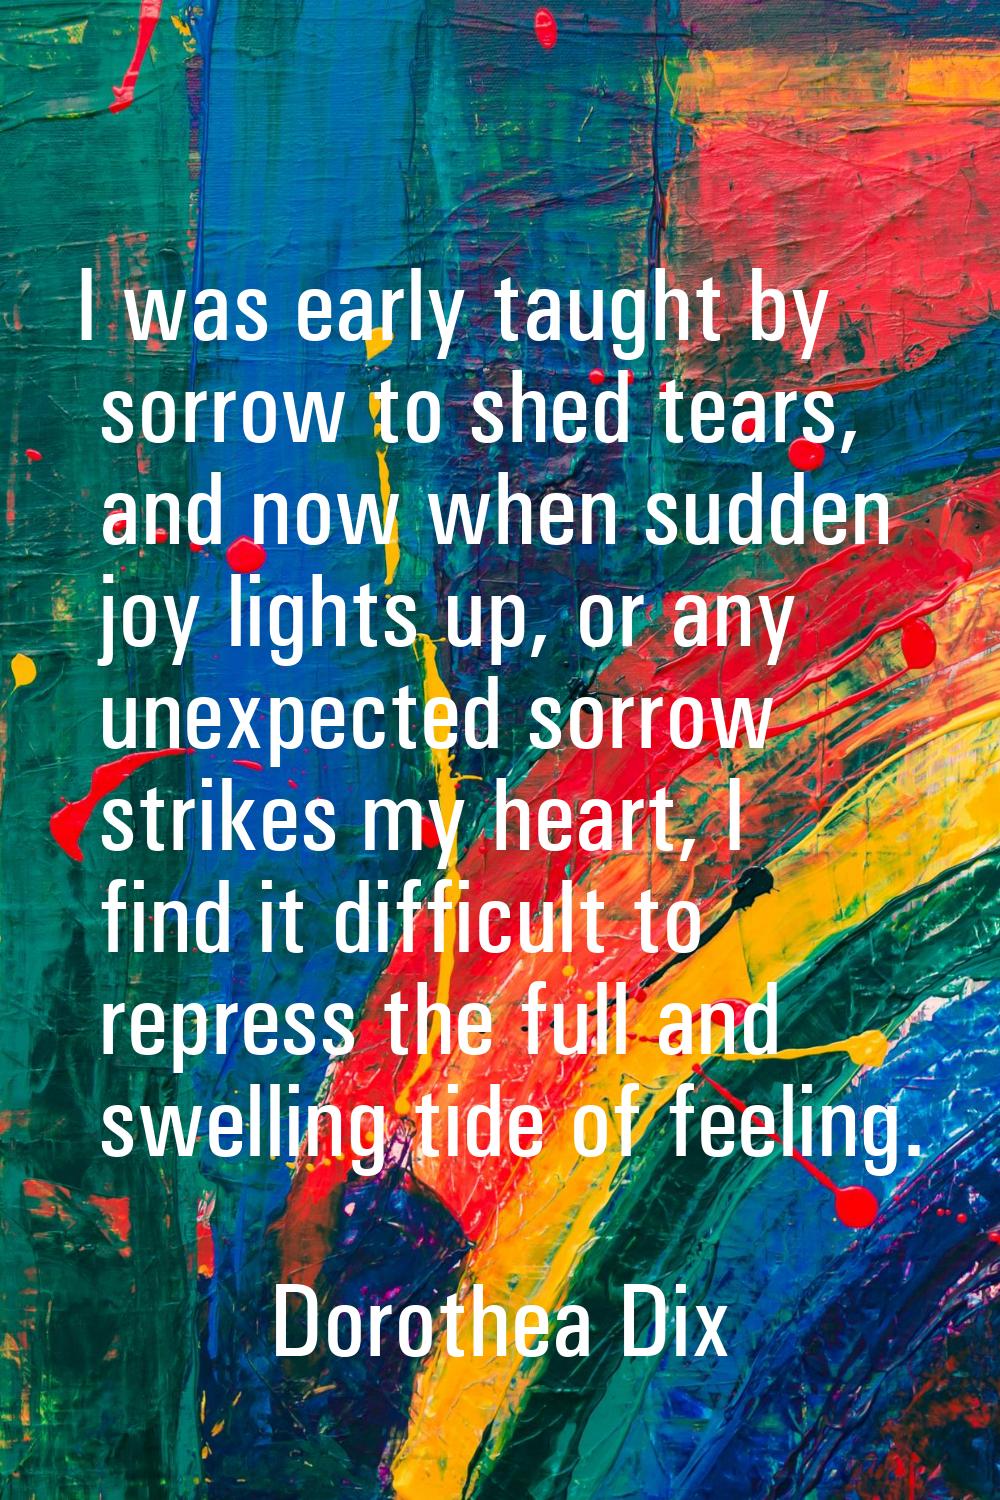 I was early taught by sorrow to shed tears, and now when sudden joy lights up, or any unexpected so